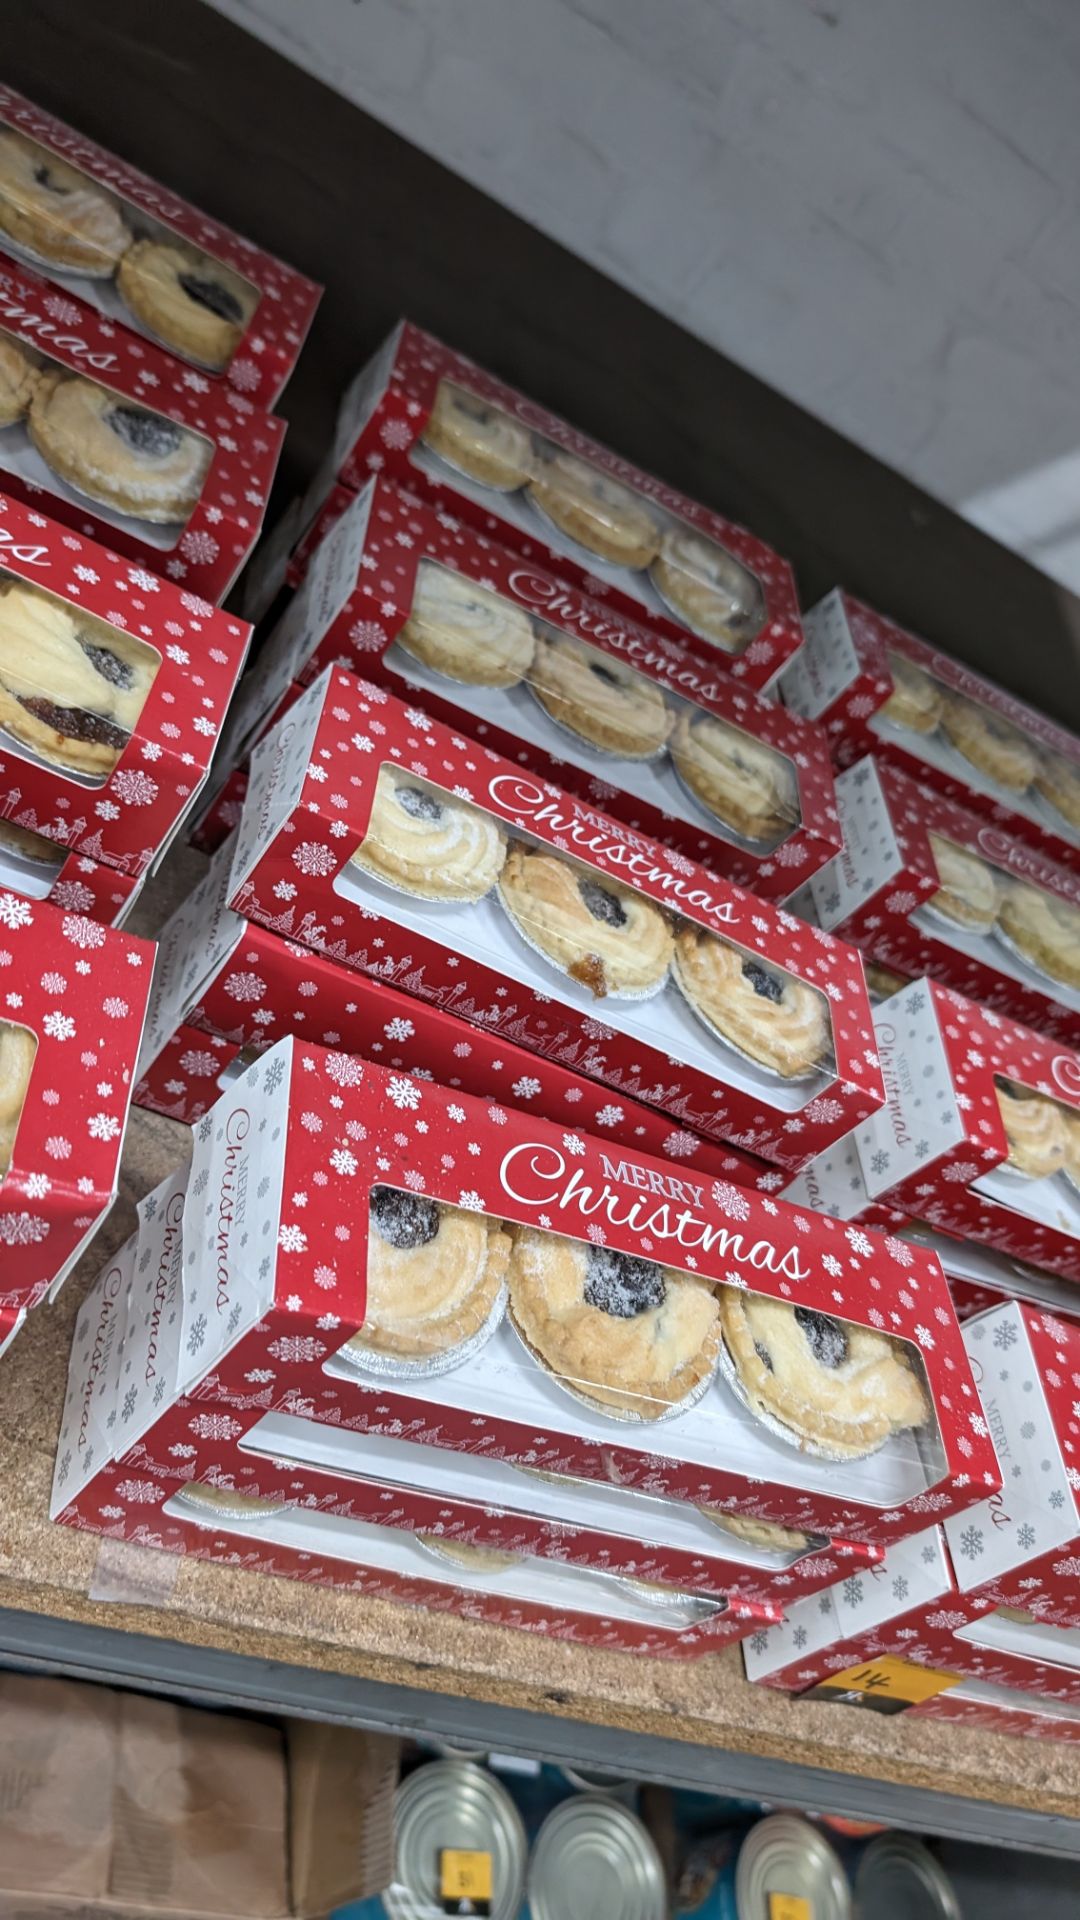 40 off 6 packs of Christmas mince pies. Each pack contains 6 pies on 2 layers & comes in Merry Chri - Image 8 of 10